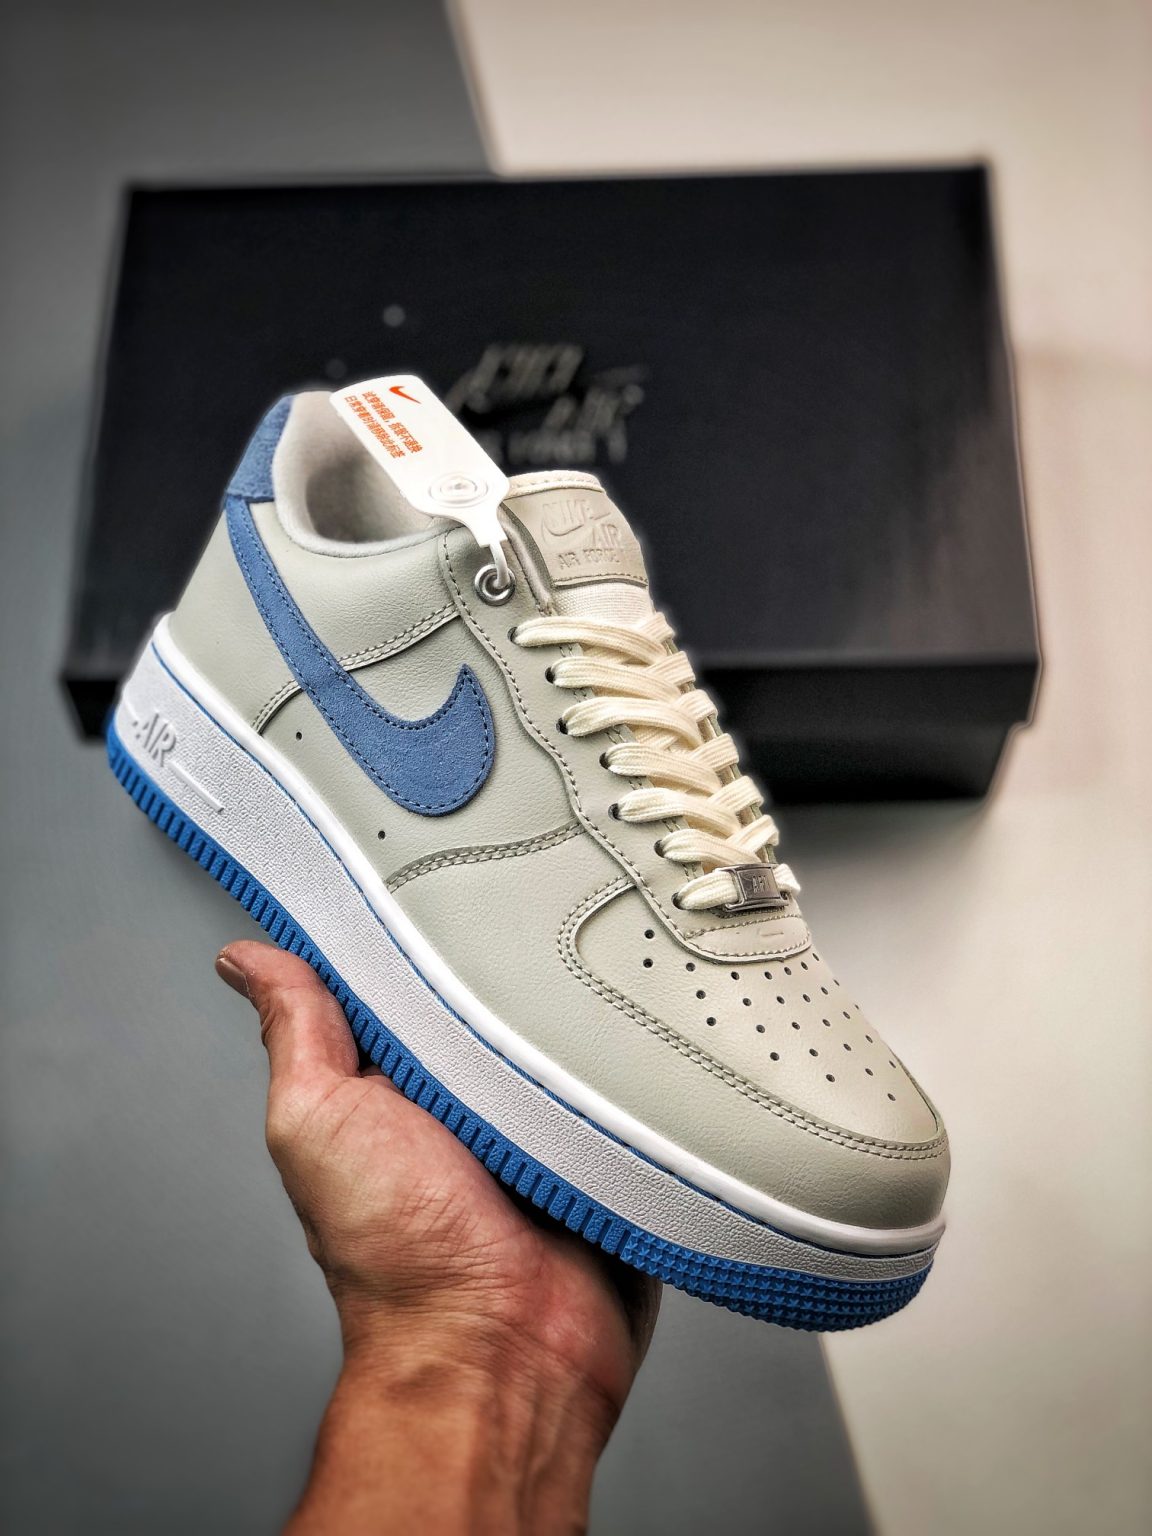 Nike Air Force 1 LXX Summit White University Blue DX1193-100 For Sale ...